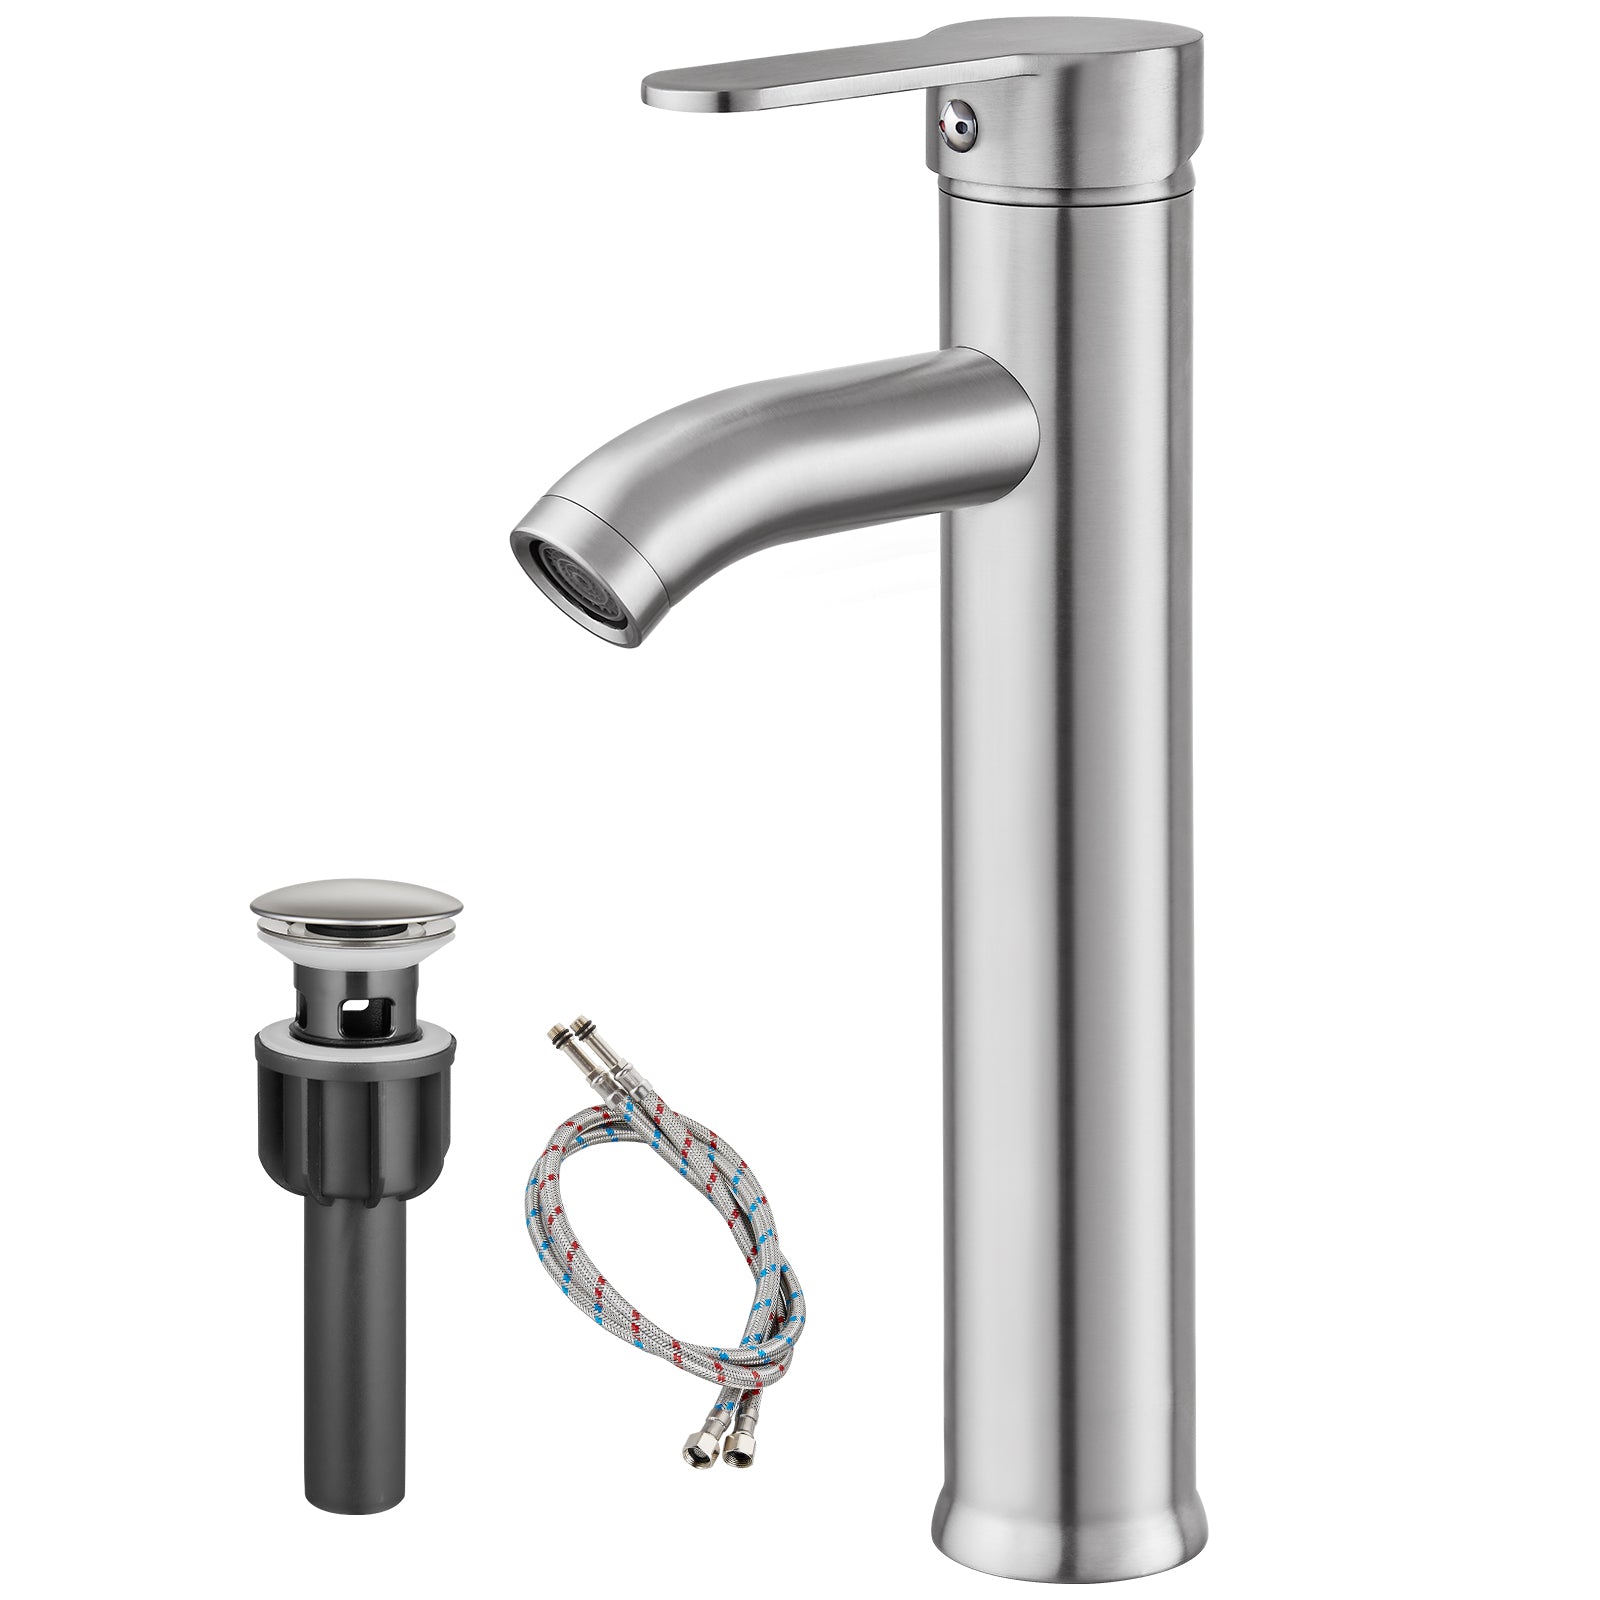 Heyalan Brushed Nickel Bathroom Faucet Vessel Sink Deck Mount Stainless Steel SUS304 Bowl Basin One Hole Singl Handle Tall Spout Mixer Tap Plastic Pop Up Drain Without Overflow